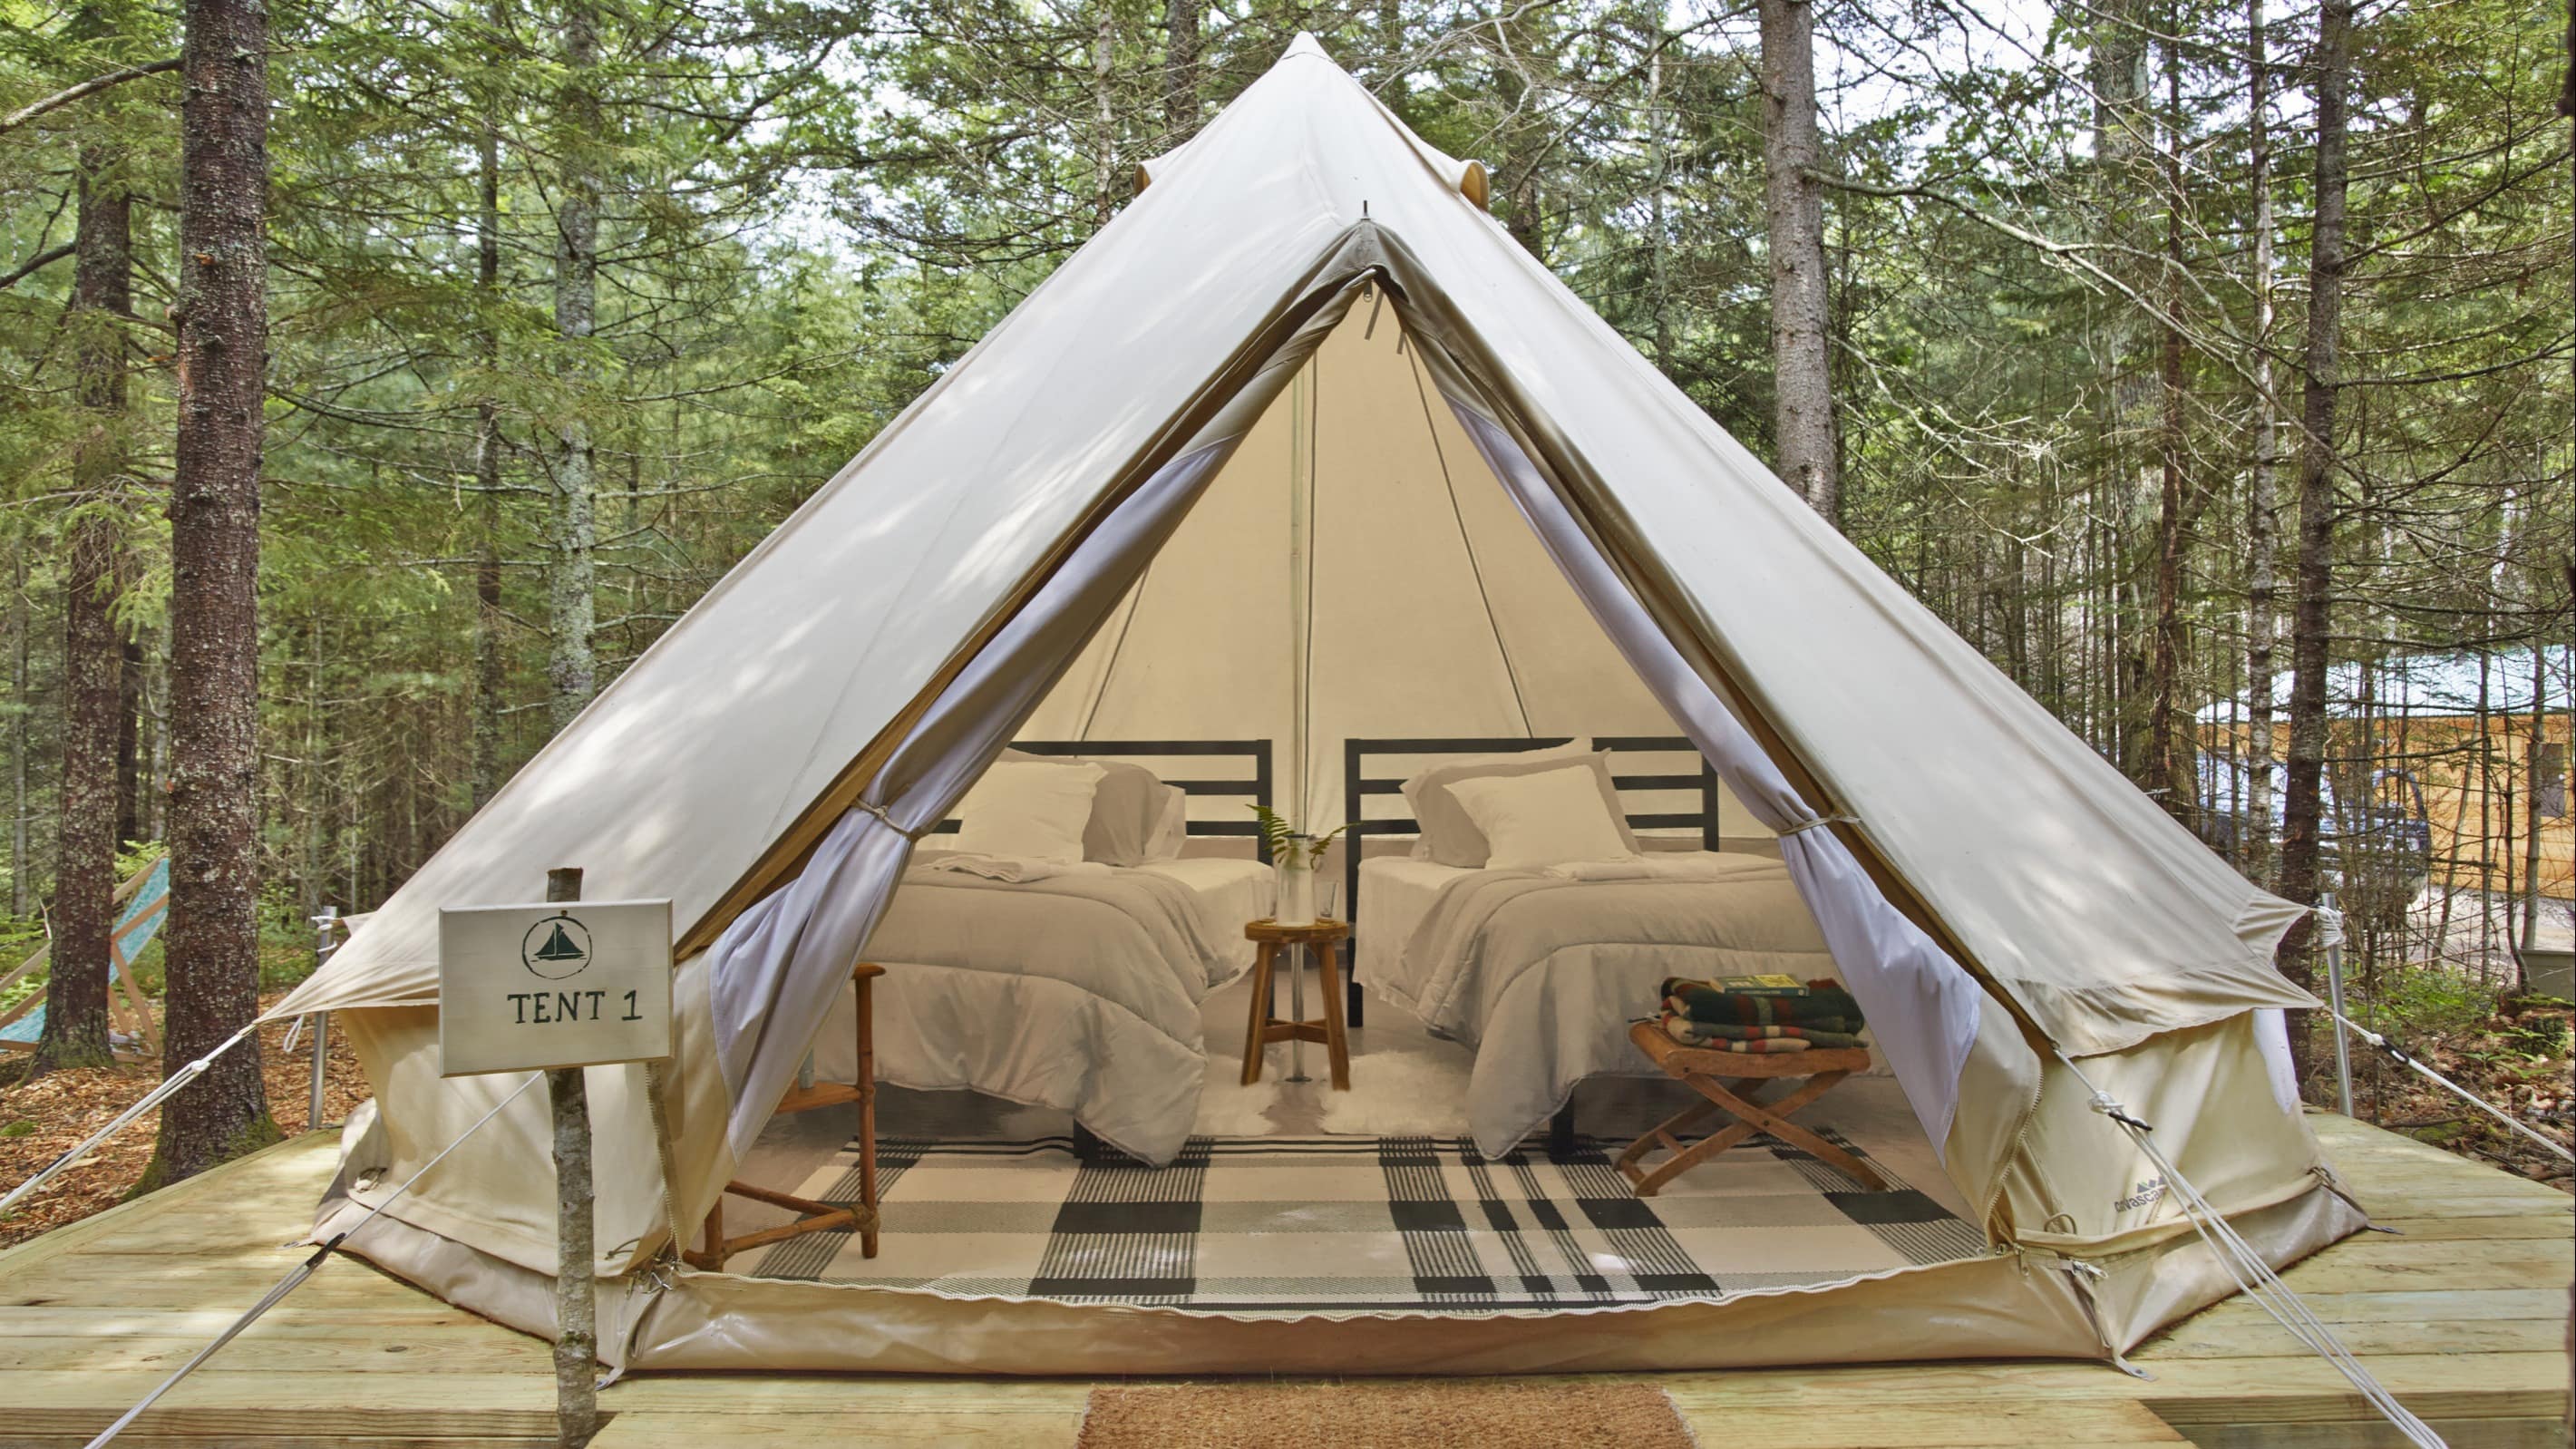 Adventures in style with luxury tents